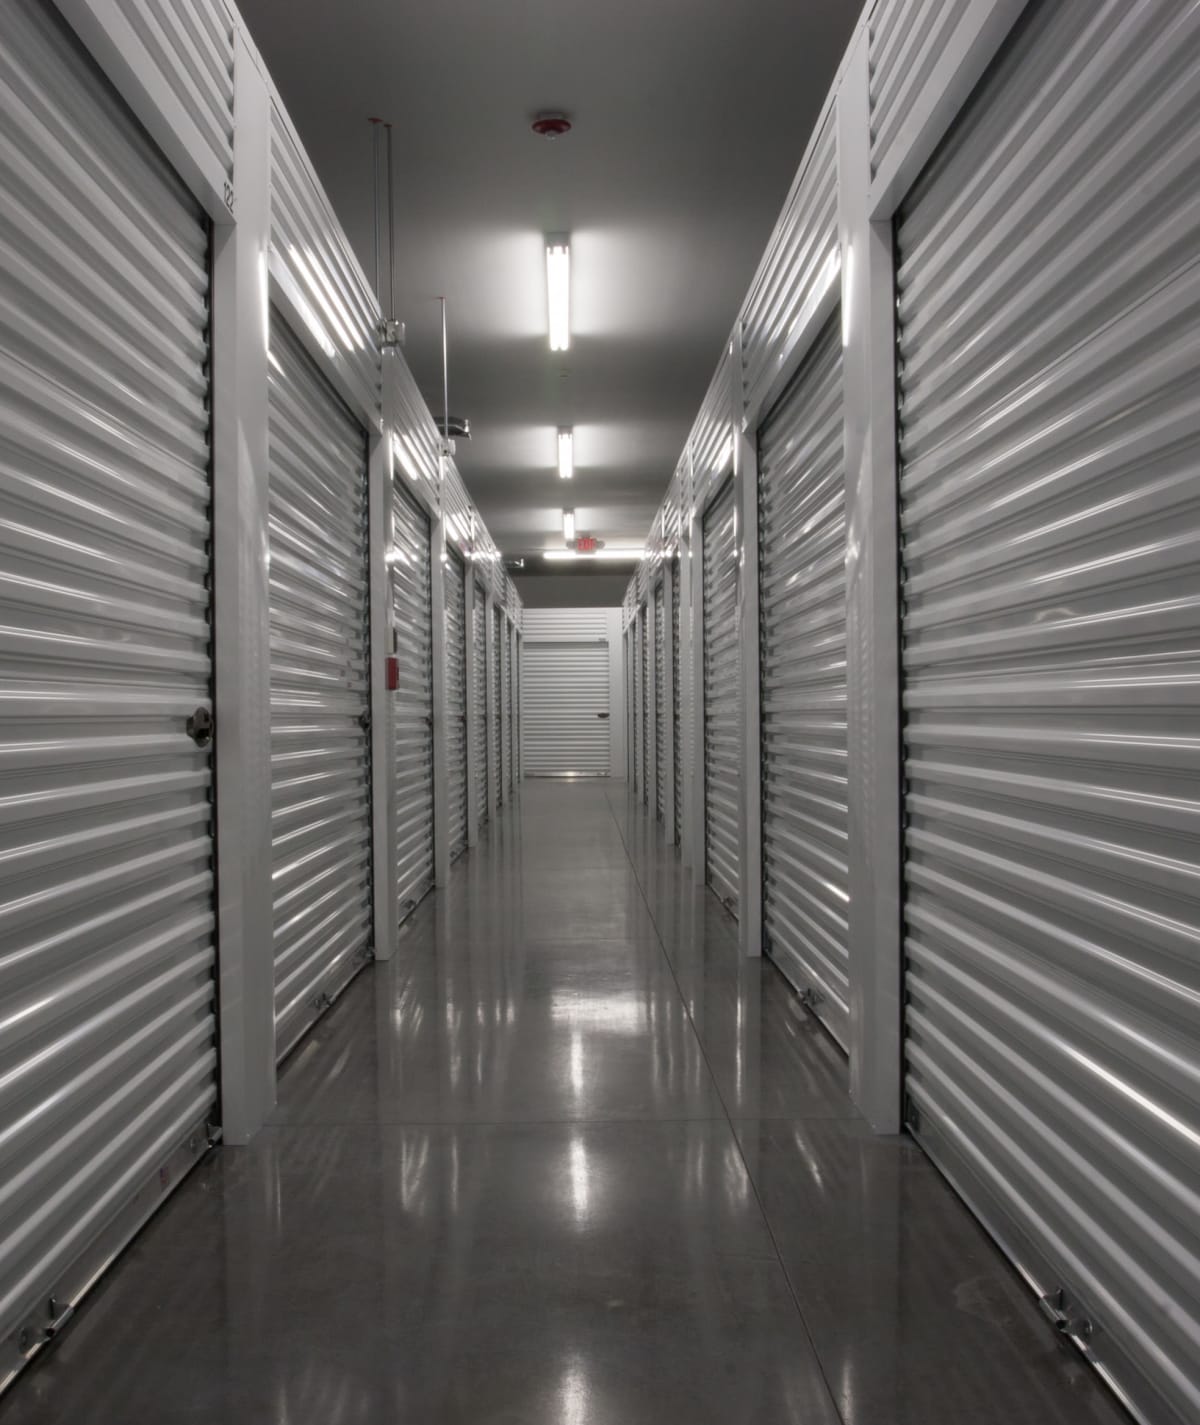 Contact us today at American Self Storage – West Pittsboro in Pittsboro, North Carolina